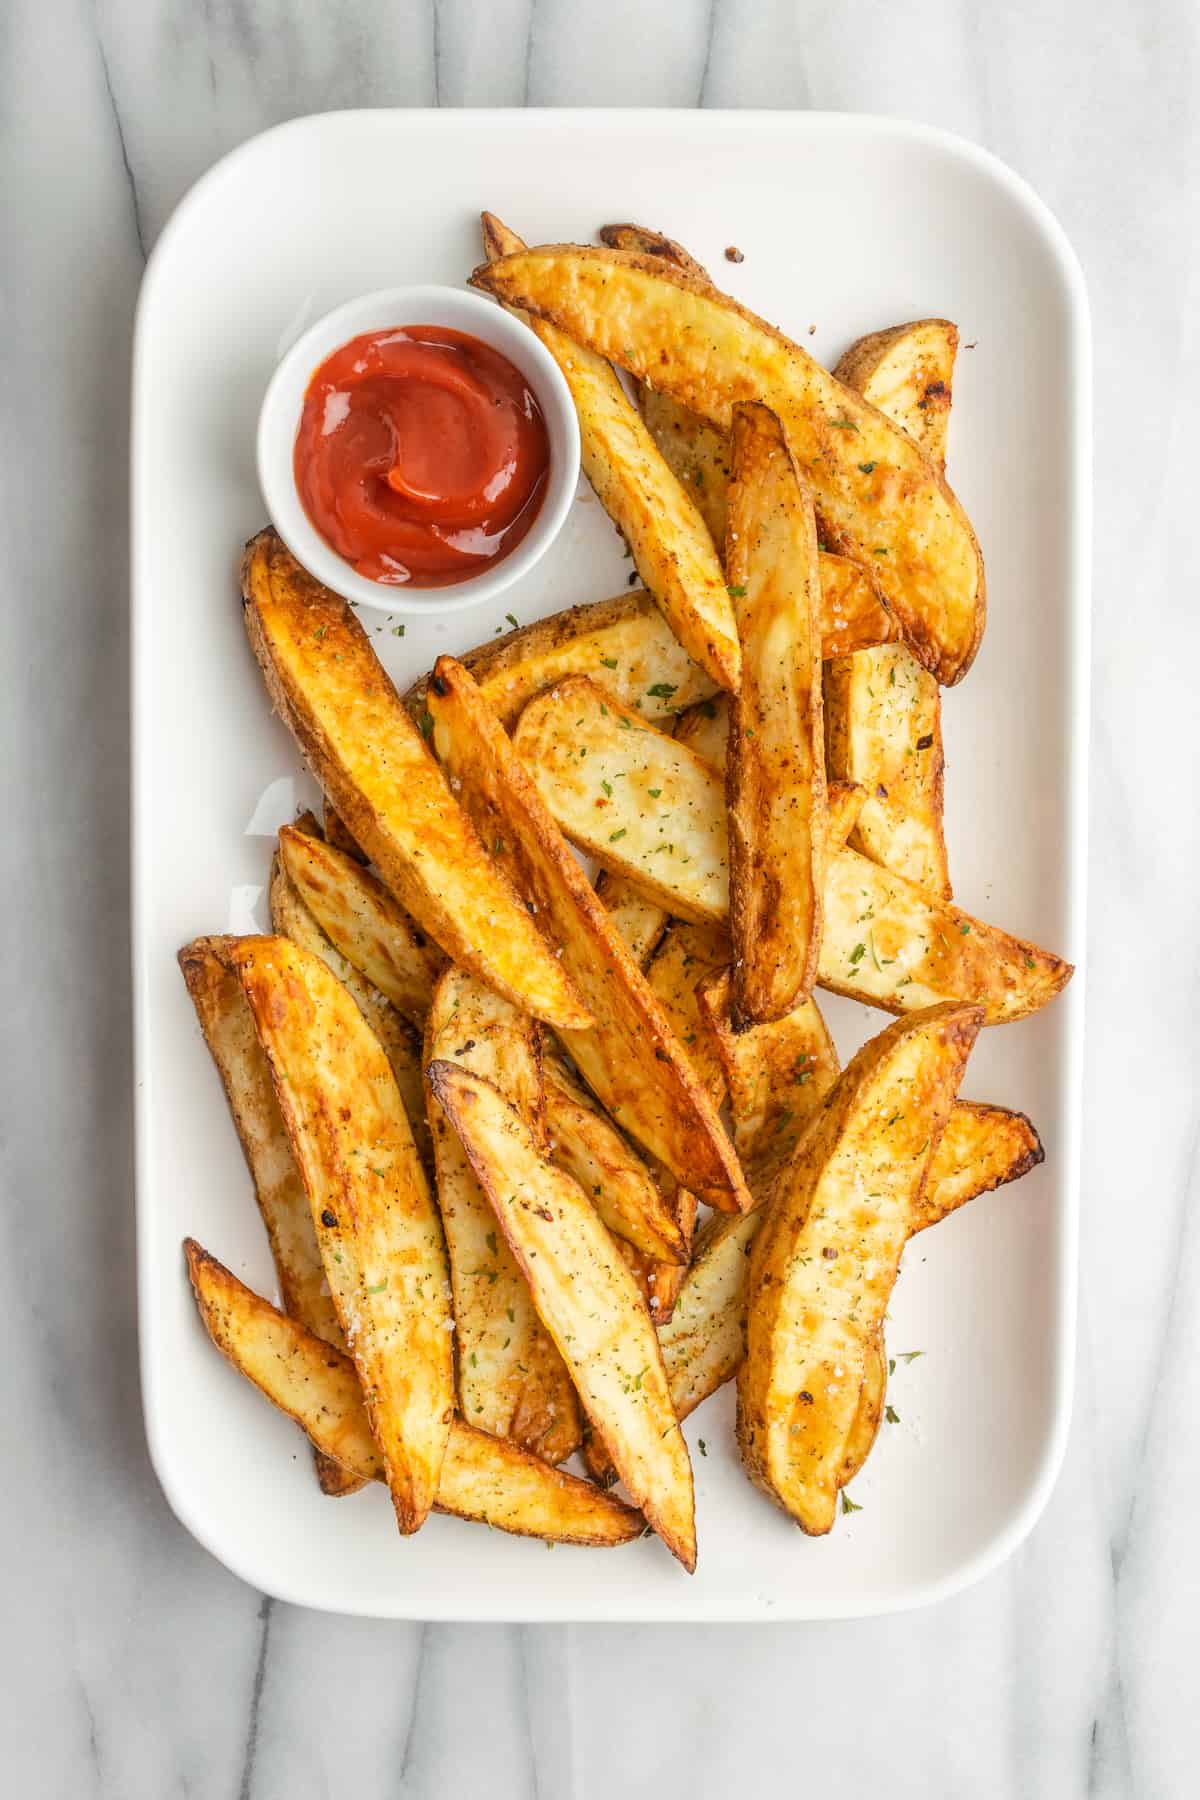 A plate of potato wedges with a ramekin of ketchup